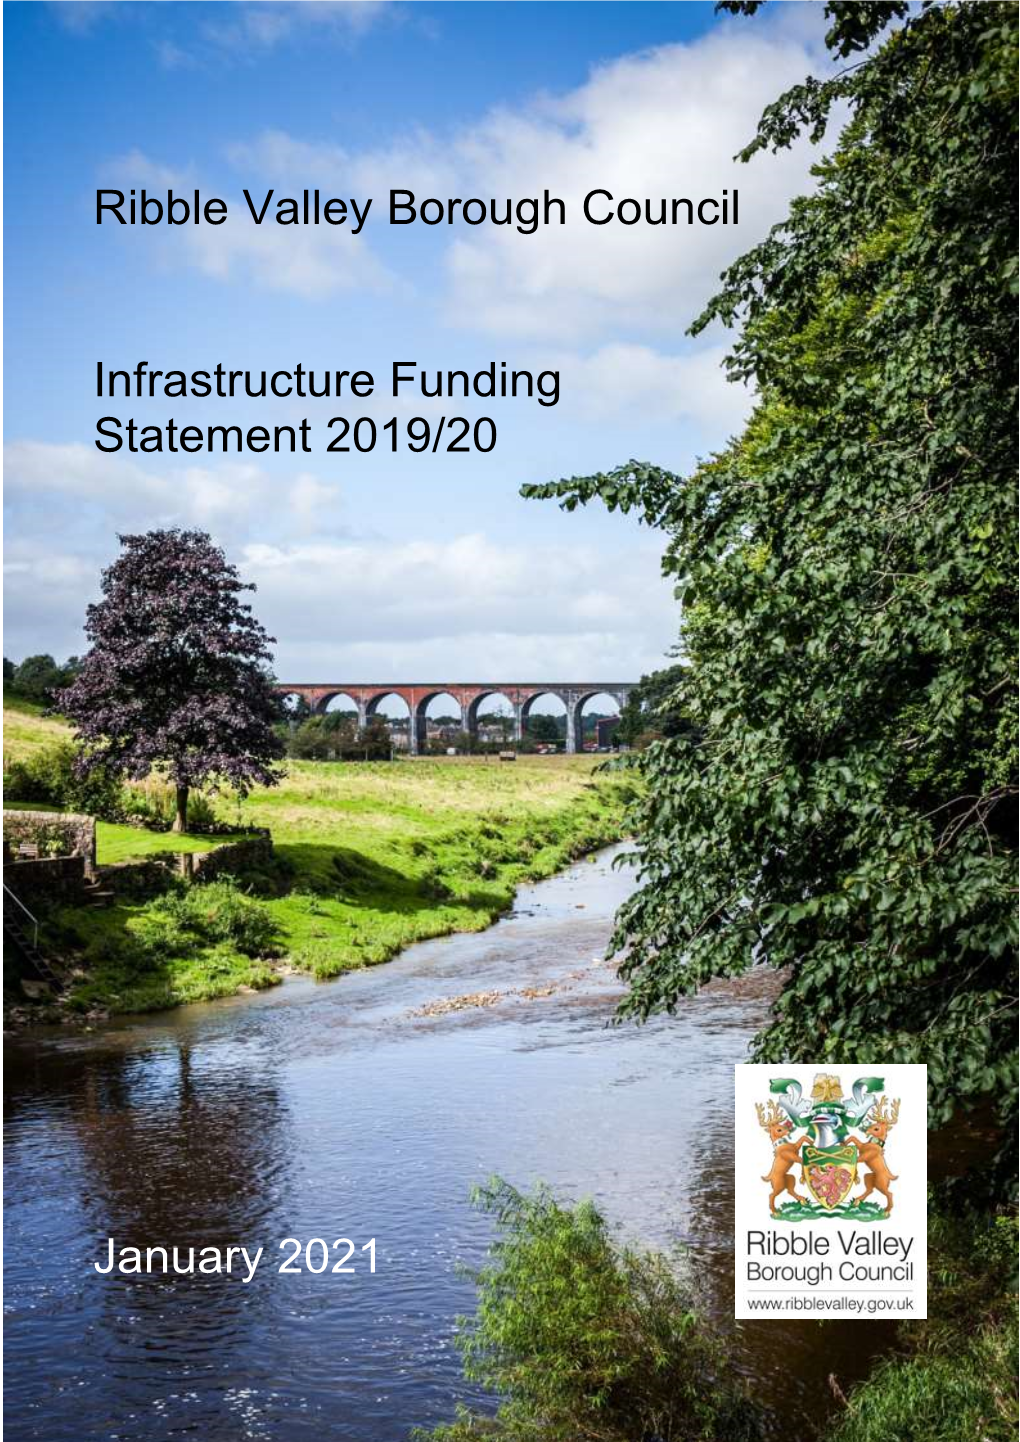 Ribble Valley Borough Council Infrastructure Funding Statement